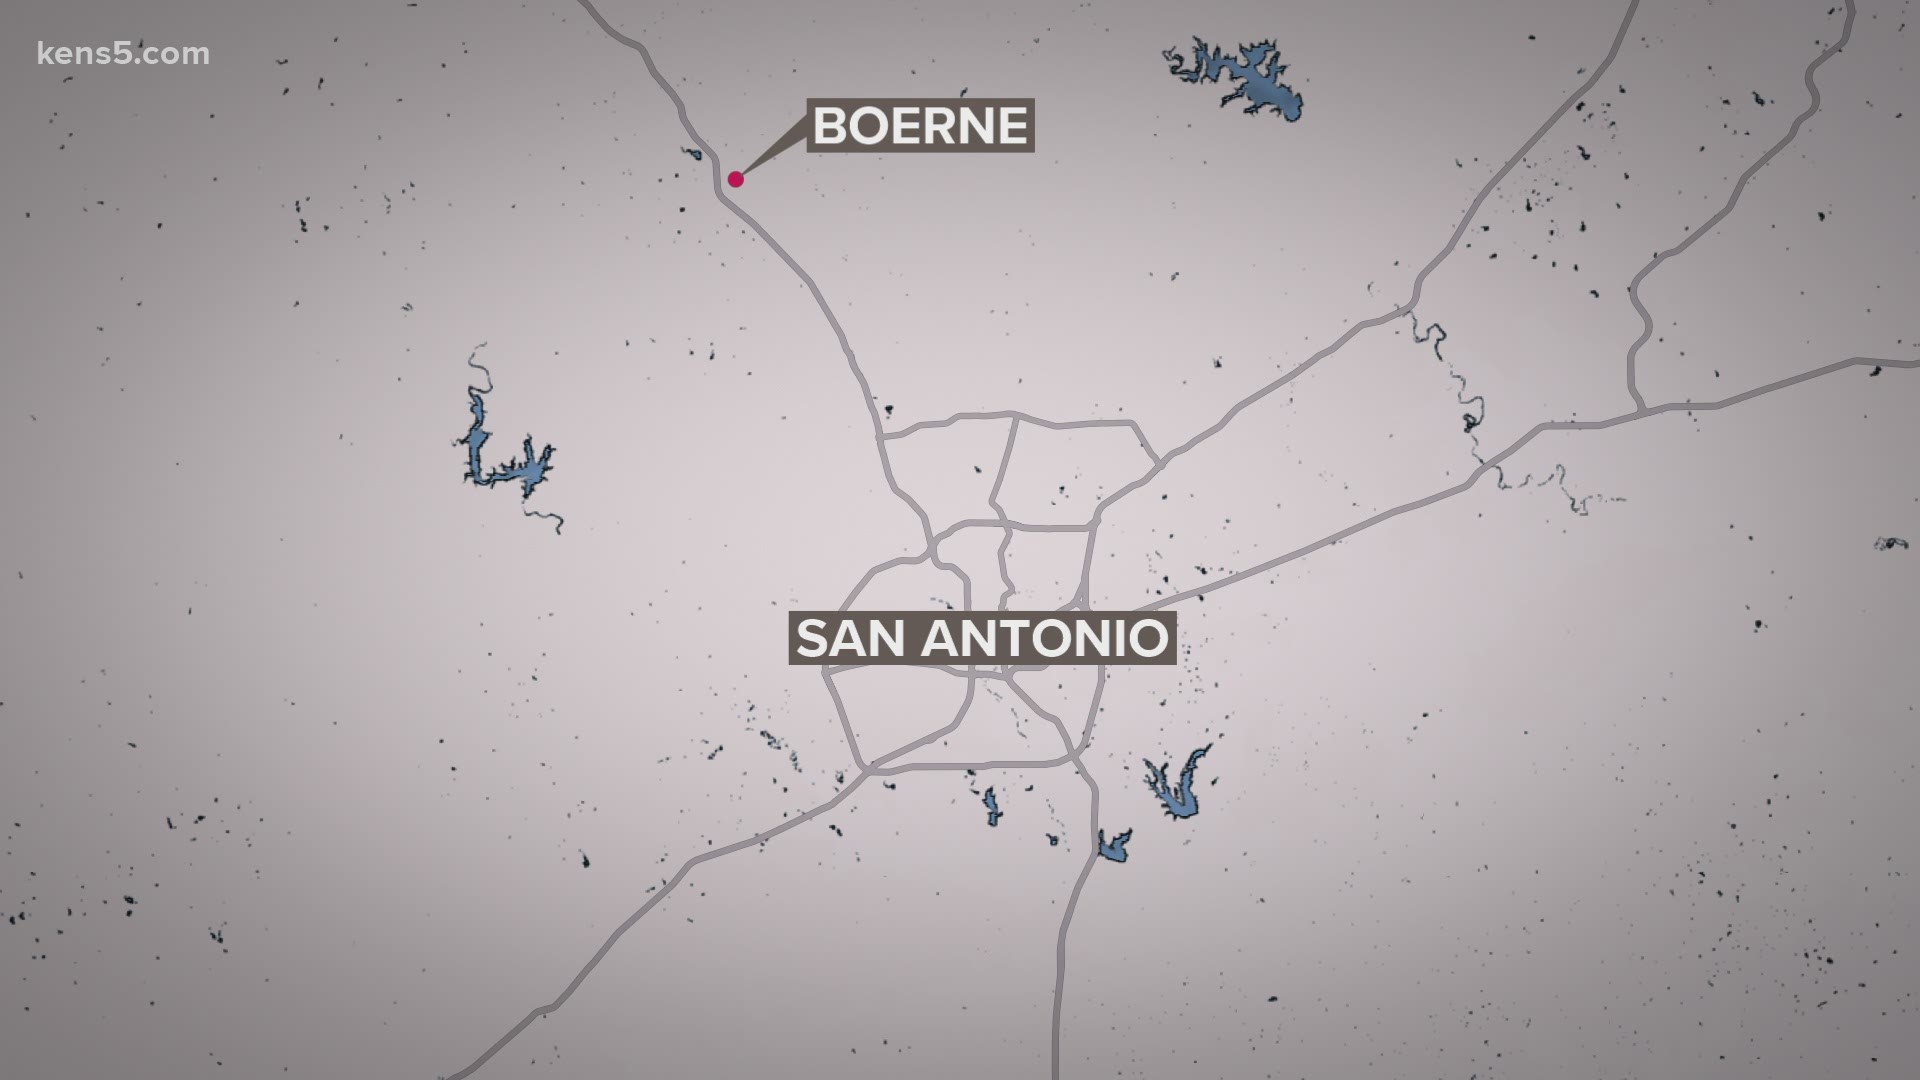 A Boerne police officer shot and killed a man who reportedly pointed his weapon at officers, refusing to drop it, the Boerne Police Department said.